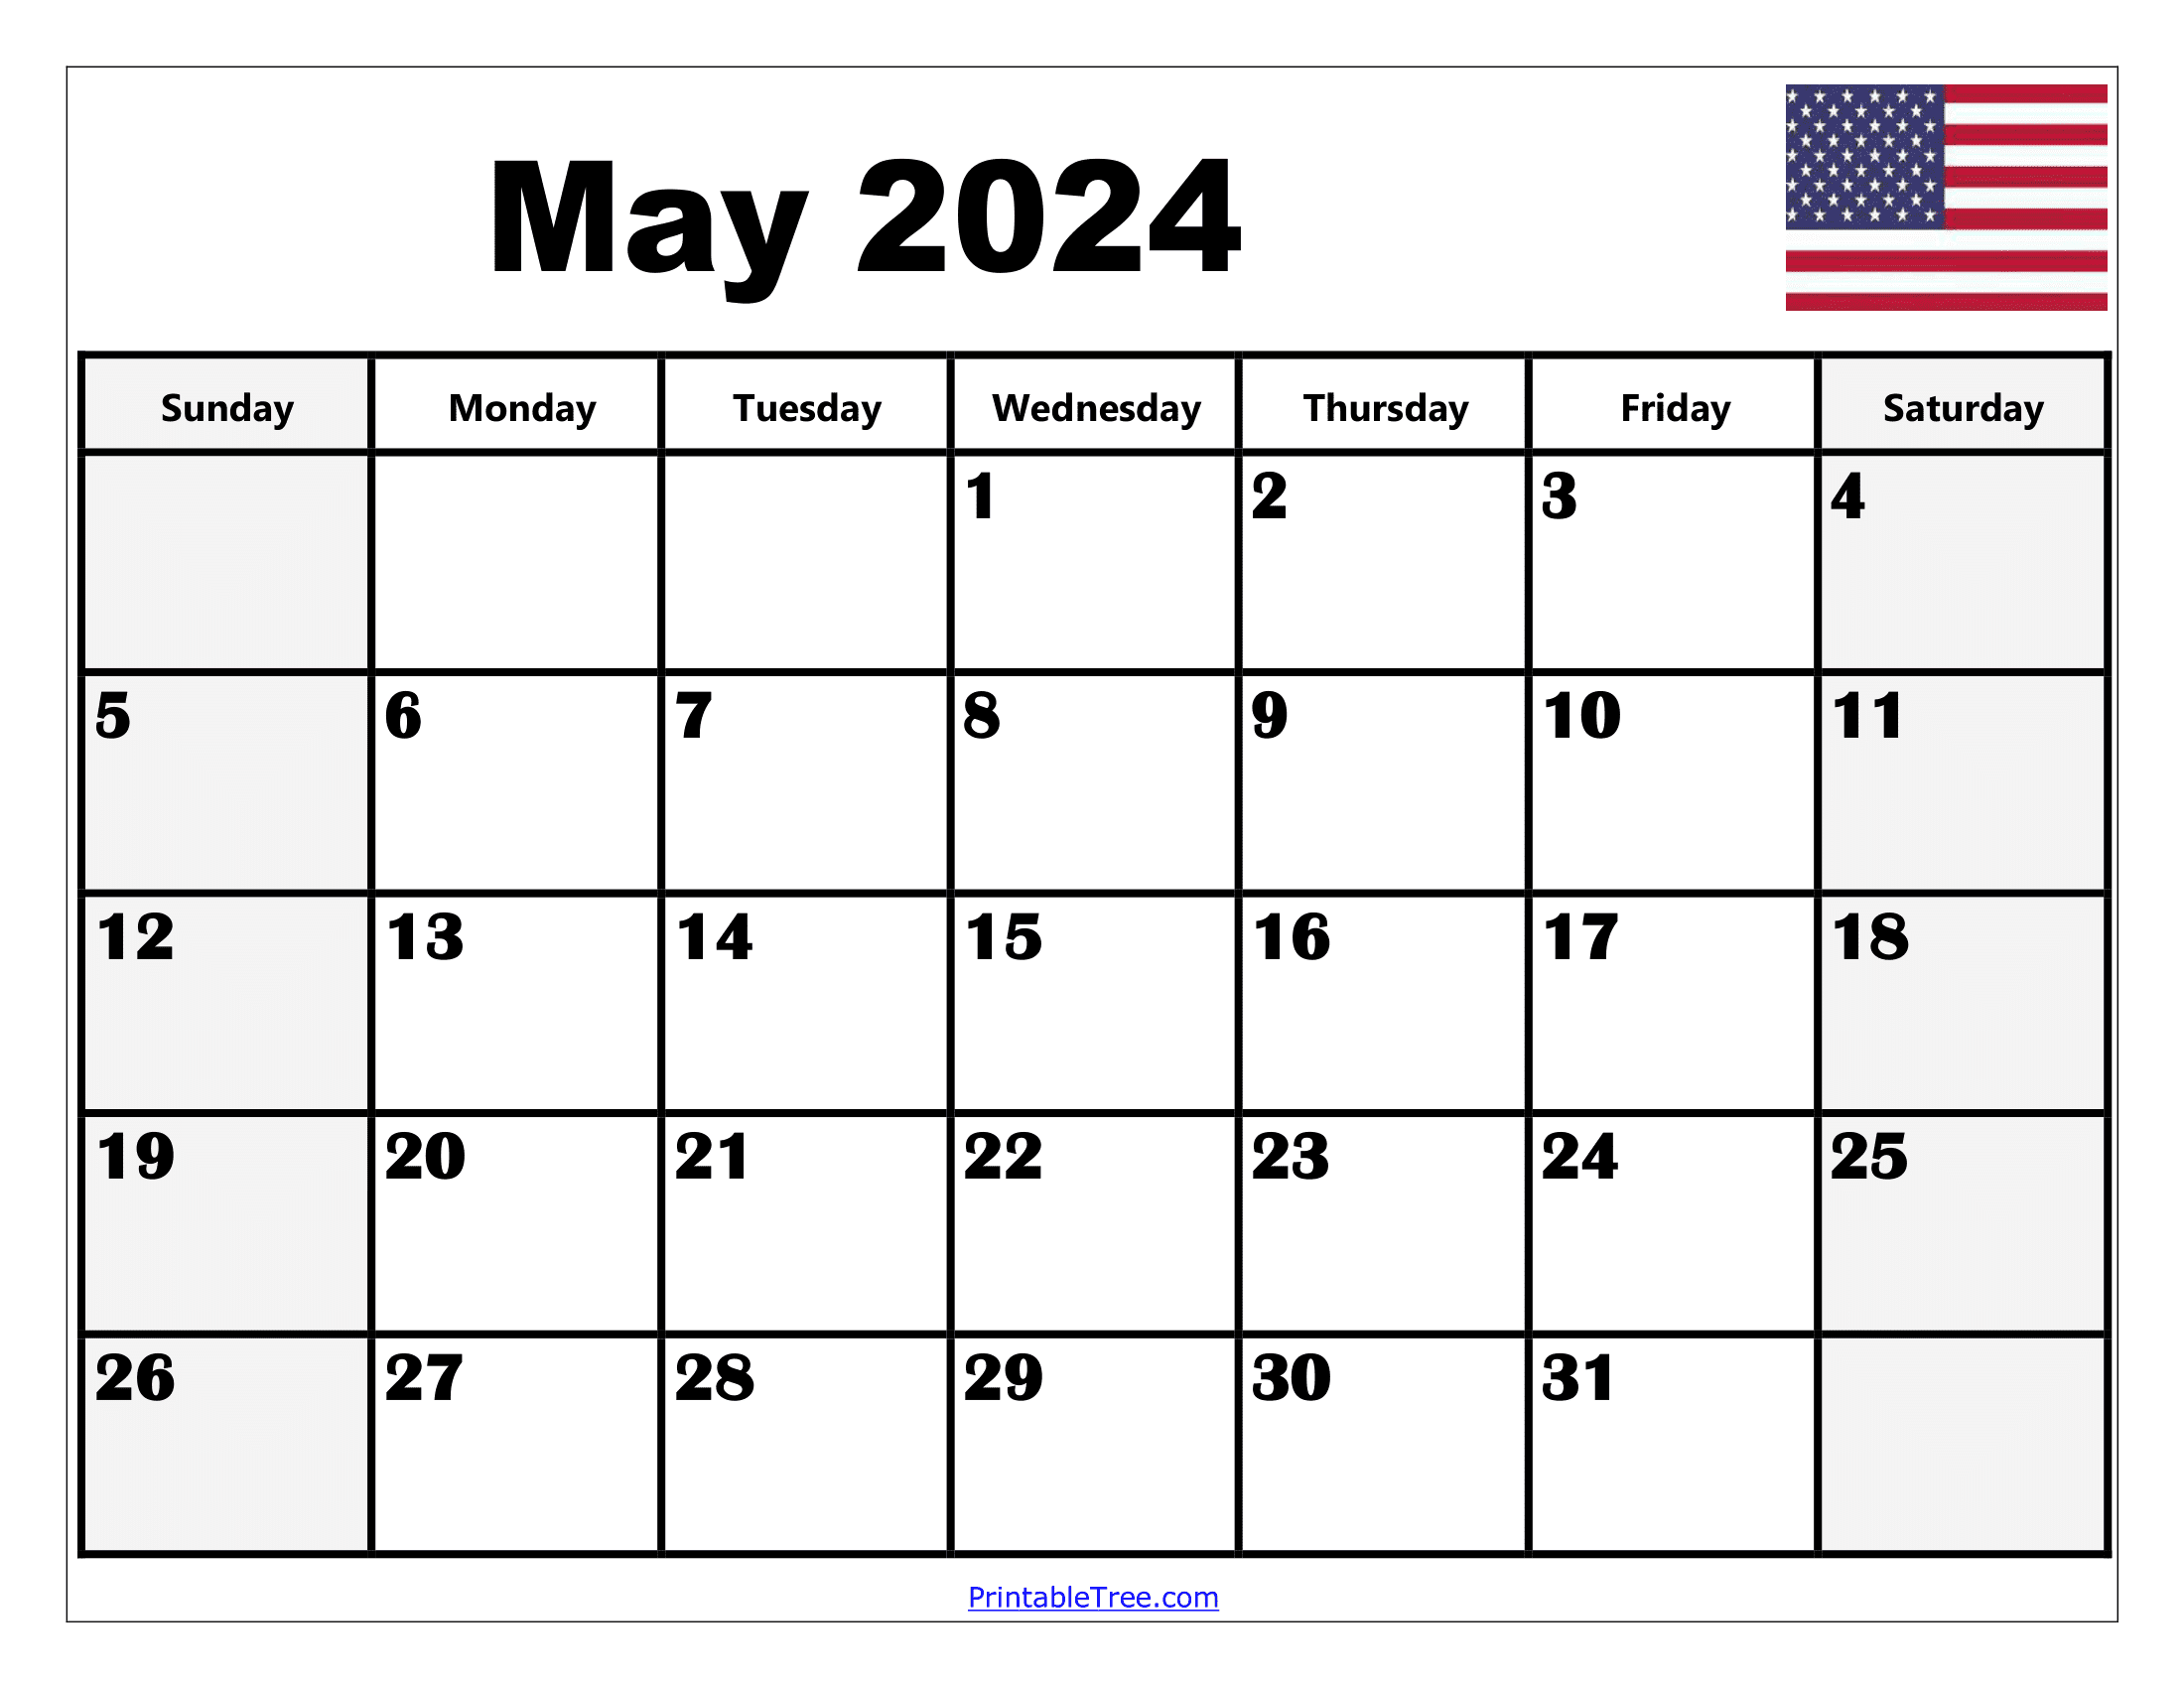 Blank May 2024 Calendar Printable Pdf Templates With Holidays in Free Printable Calendar 2024 May June July